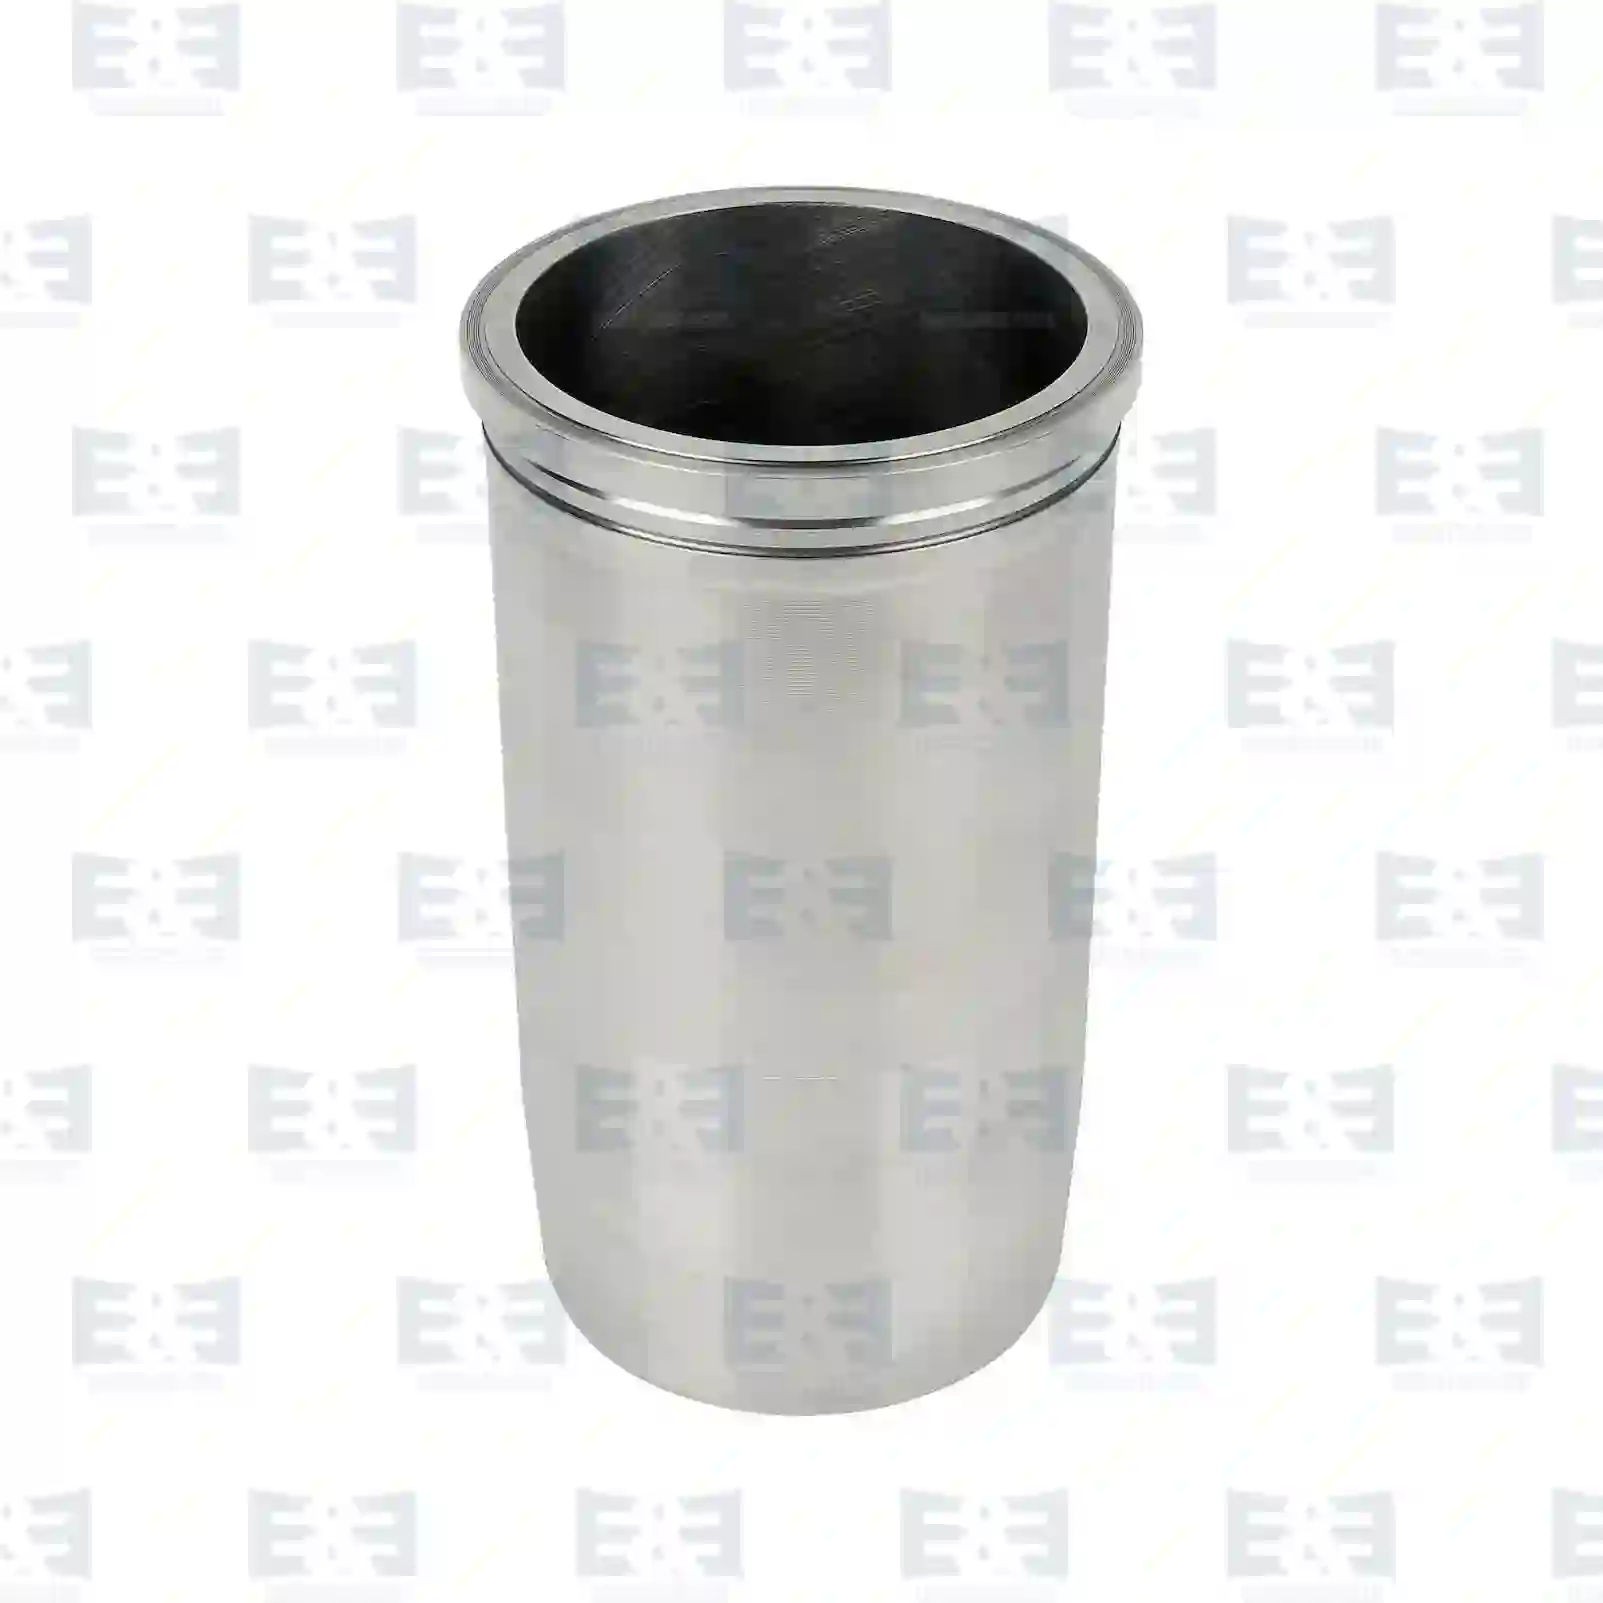 Cylinder liner, without seal rings, 2E2209566, 4270110110, 4270110210, 4470110110, 4470110210 ||  2E2209566 E&E Truck Spare Parts | Truck Spare Parts, Auotomotive Spare Parts Cylinder liner, without seal rings, 2E2209566, 4270110110, 4270110210, 4470110110, 4470110210 ||  2E2209566 E&E Truck Spare Parts | Truck Spare Parts, Auotomotive Spare Parts